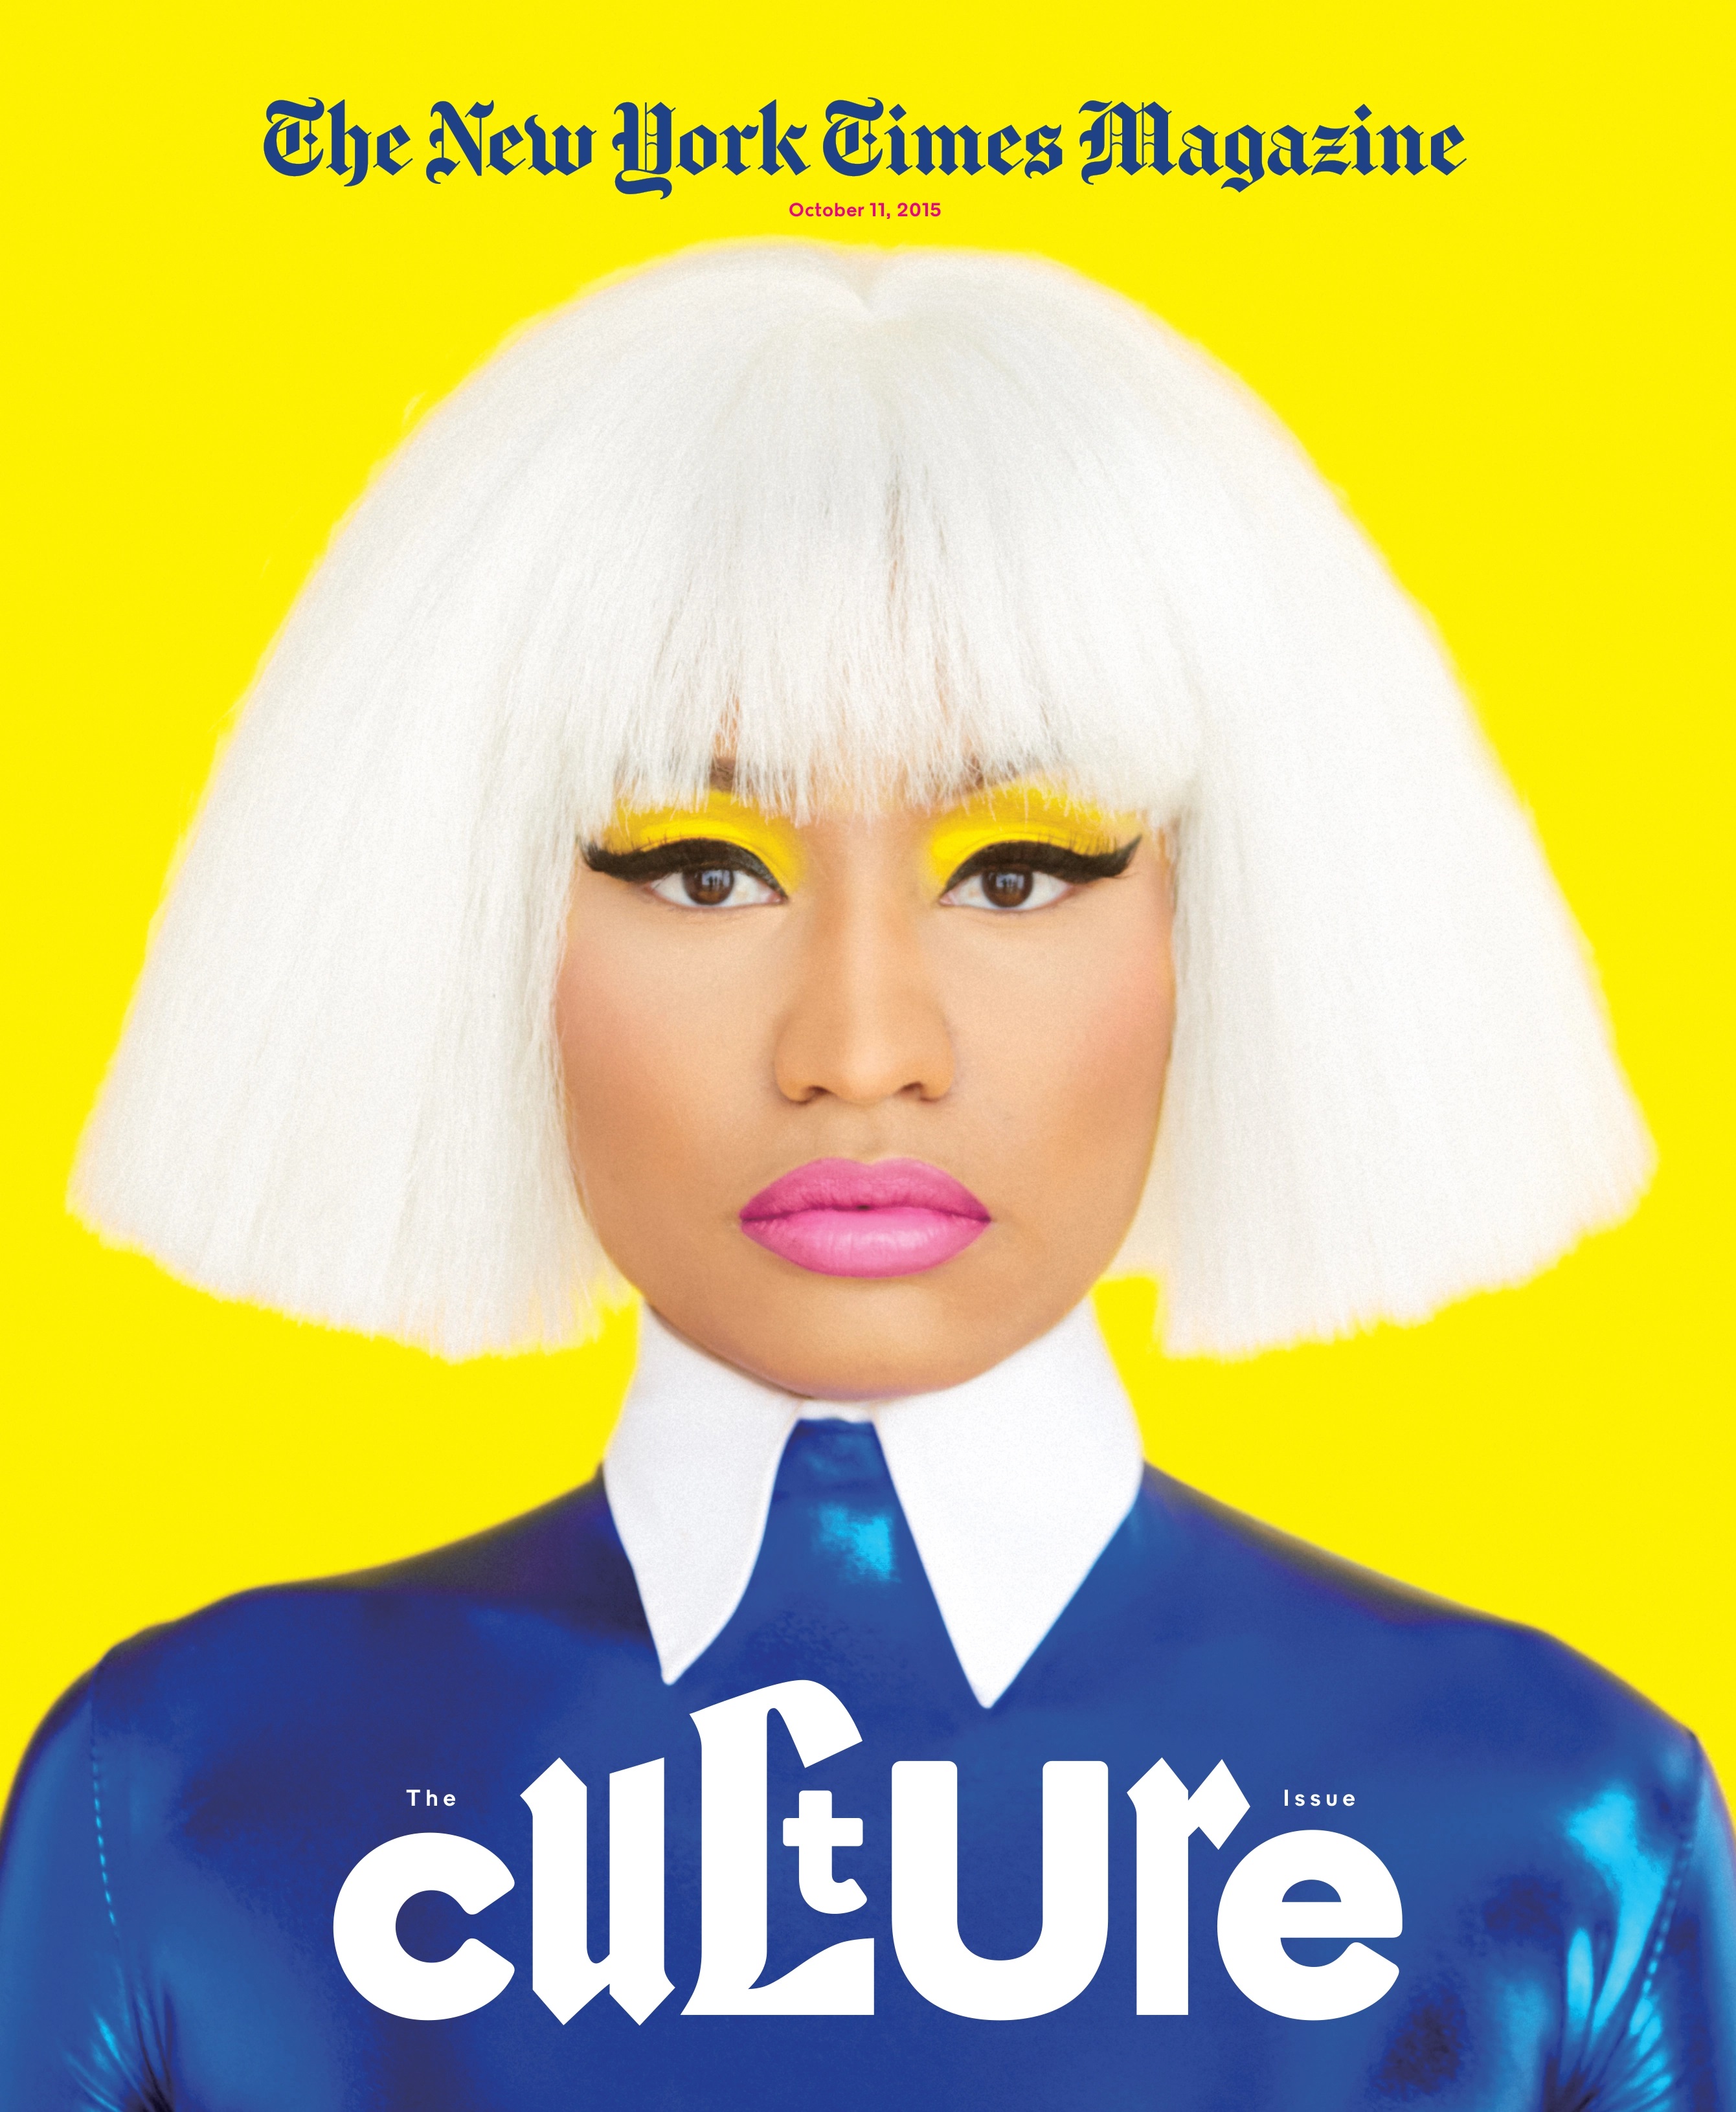 The New York Times Magazine-"The Culture Issue," October 11